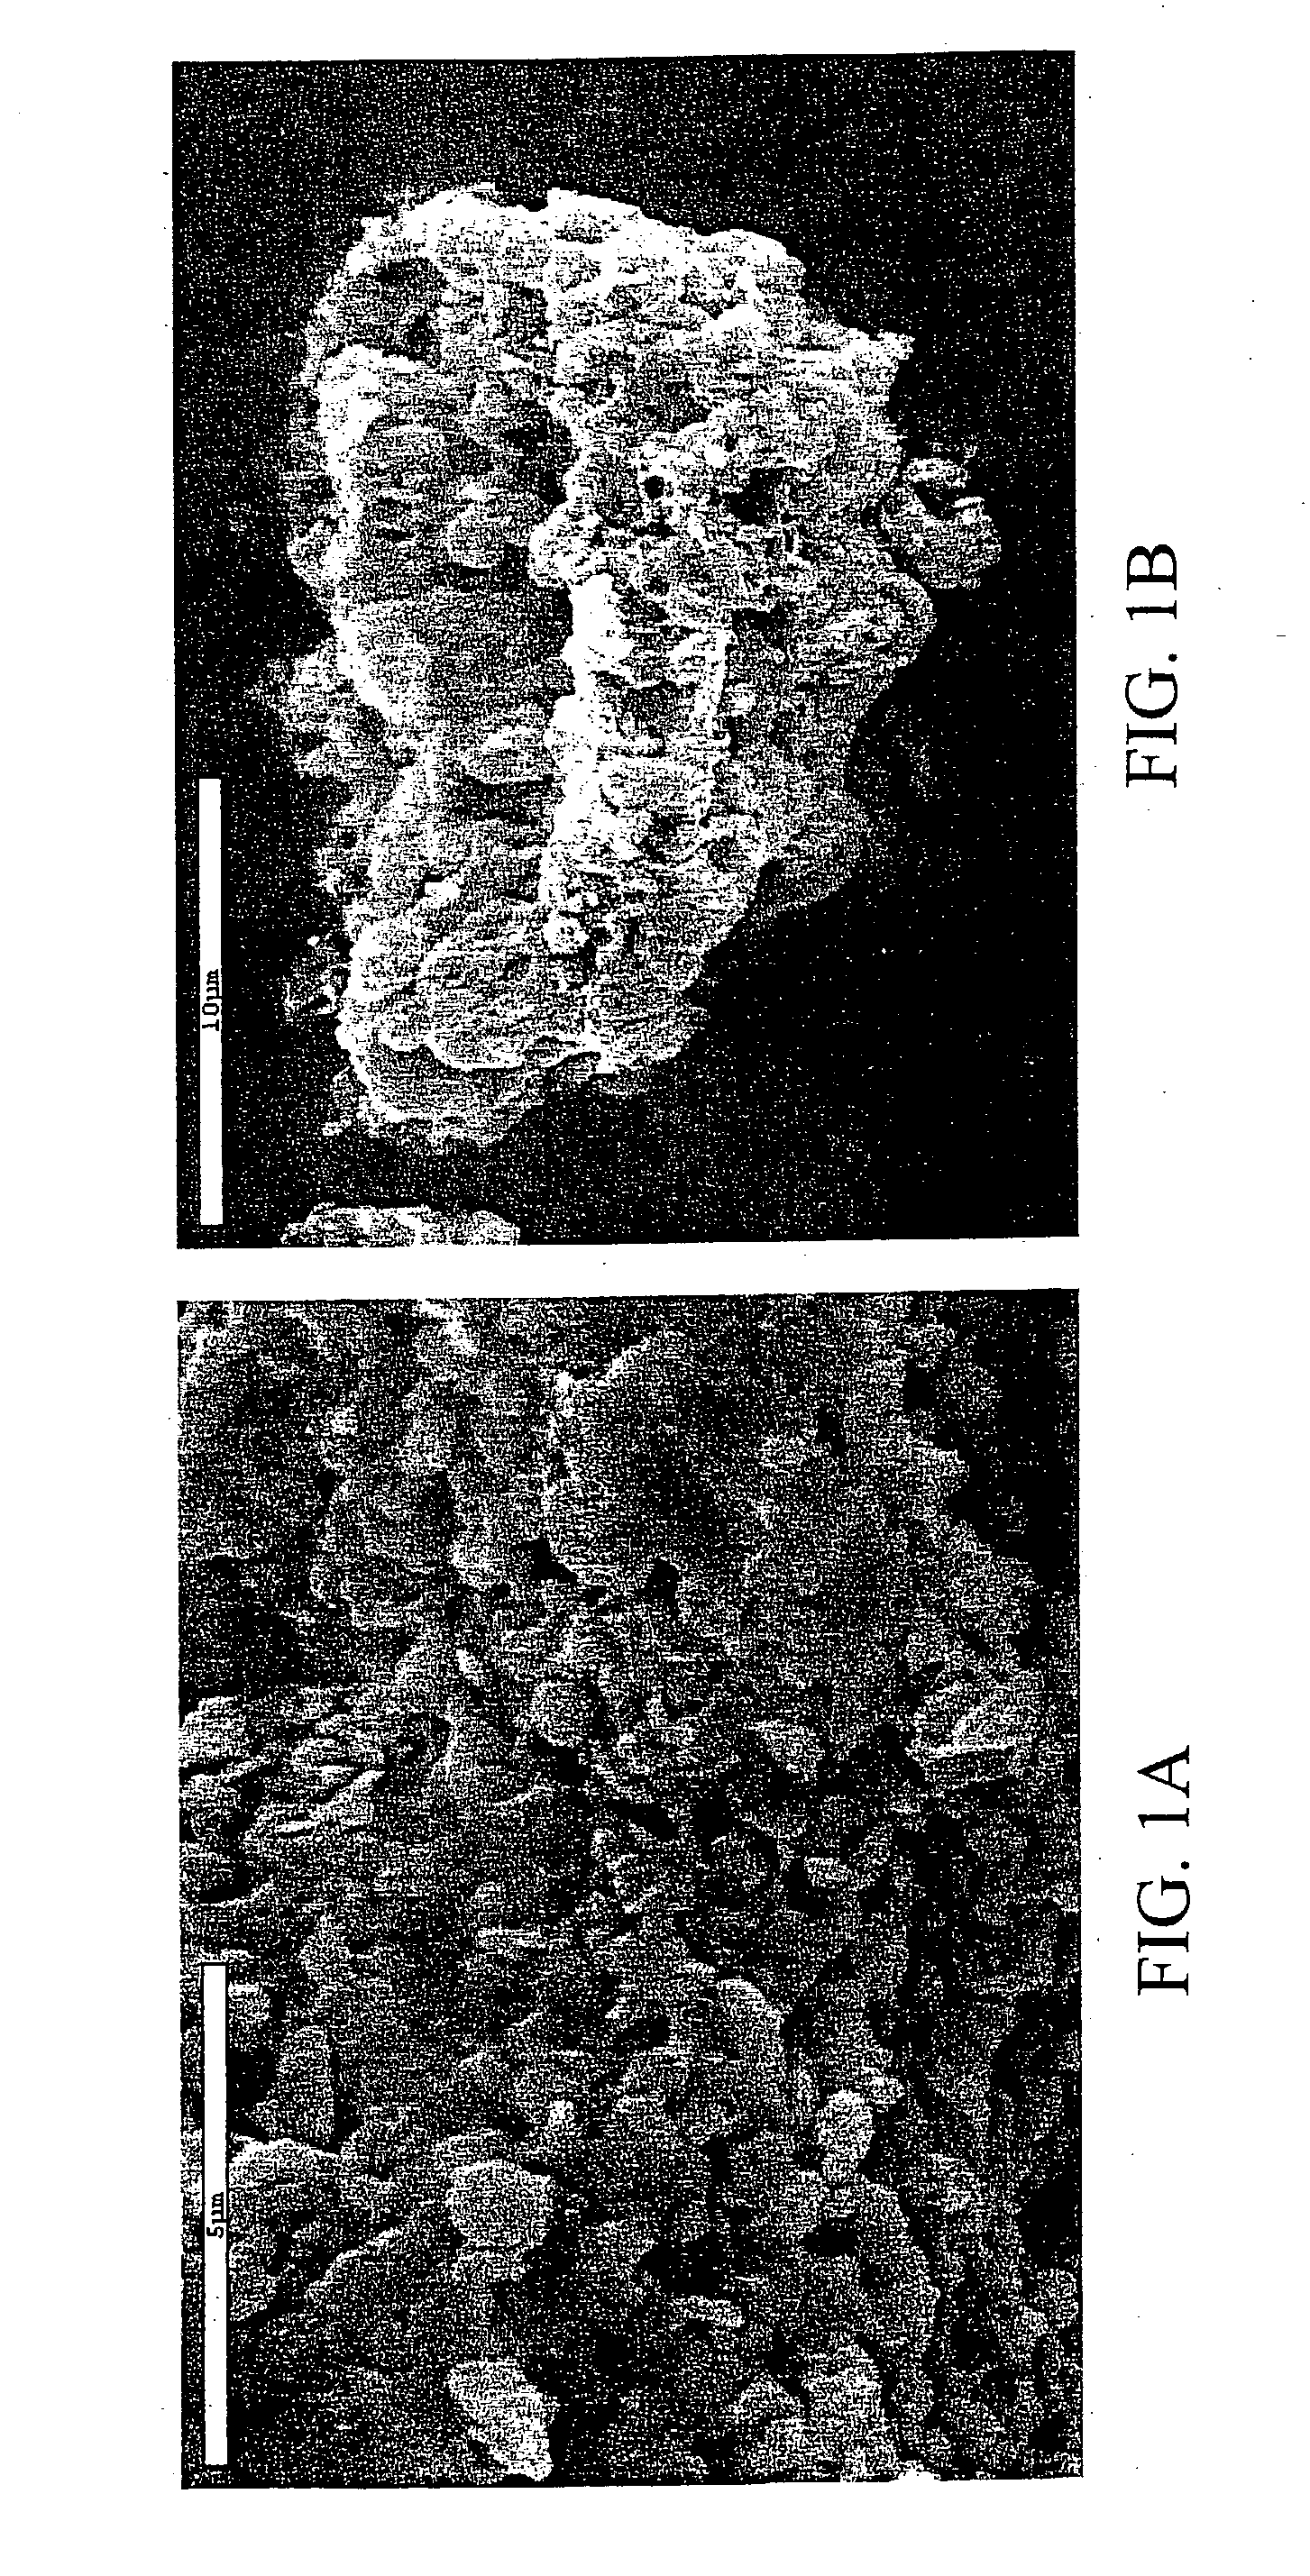 Novel methods for preparing rare-earth oxysulfide phosphors, and resulting materials